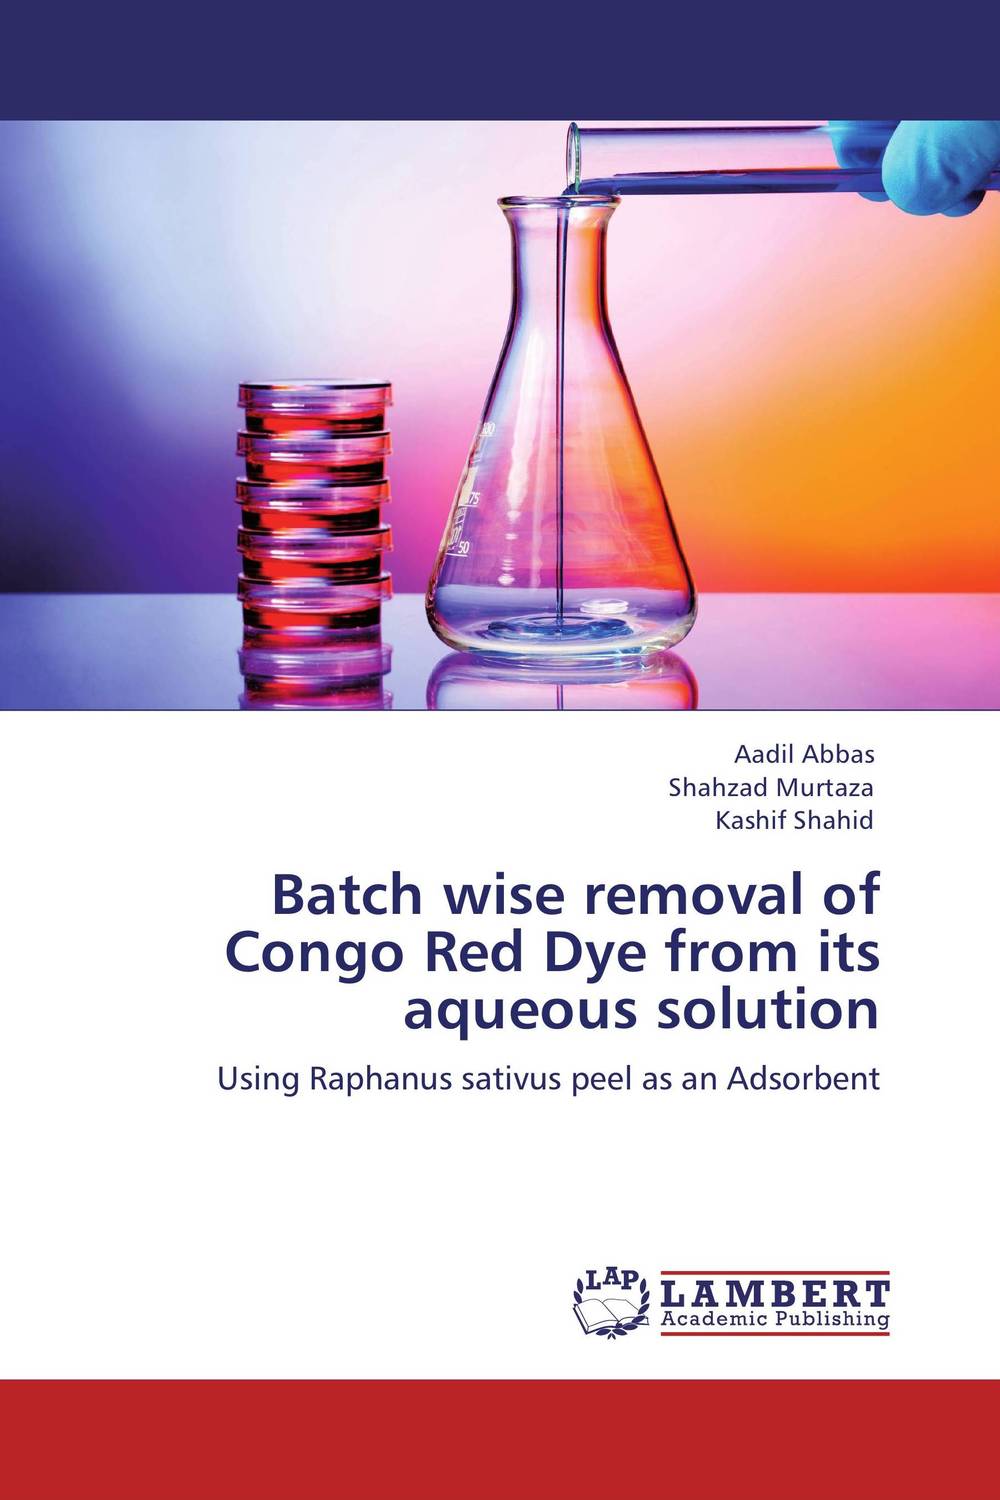 Batch wise removal of Congo Red Dye from its aqueous solution